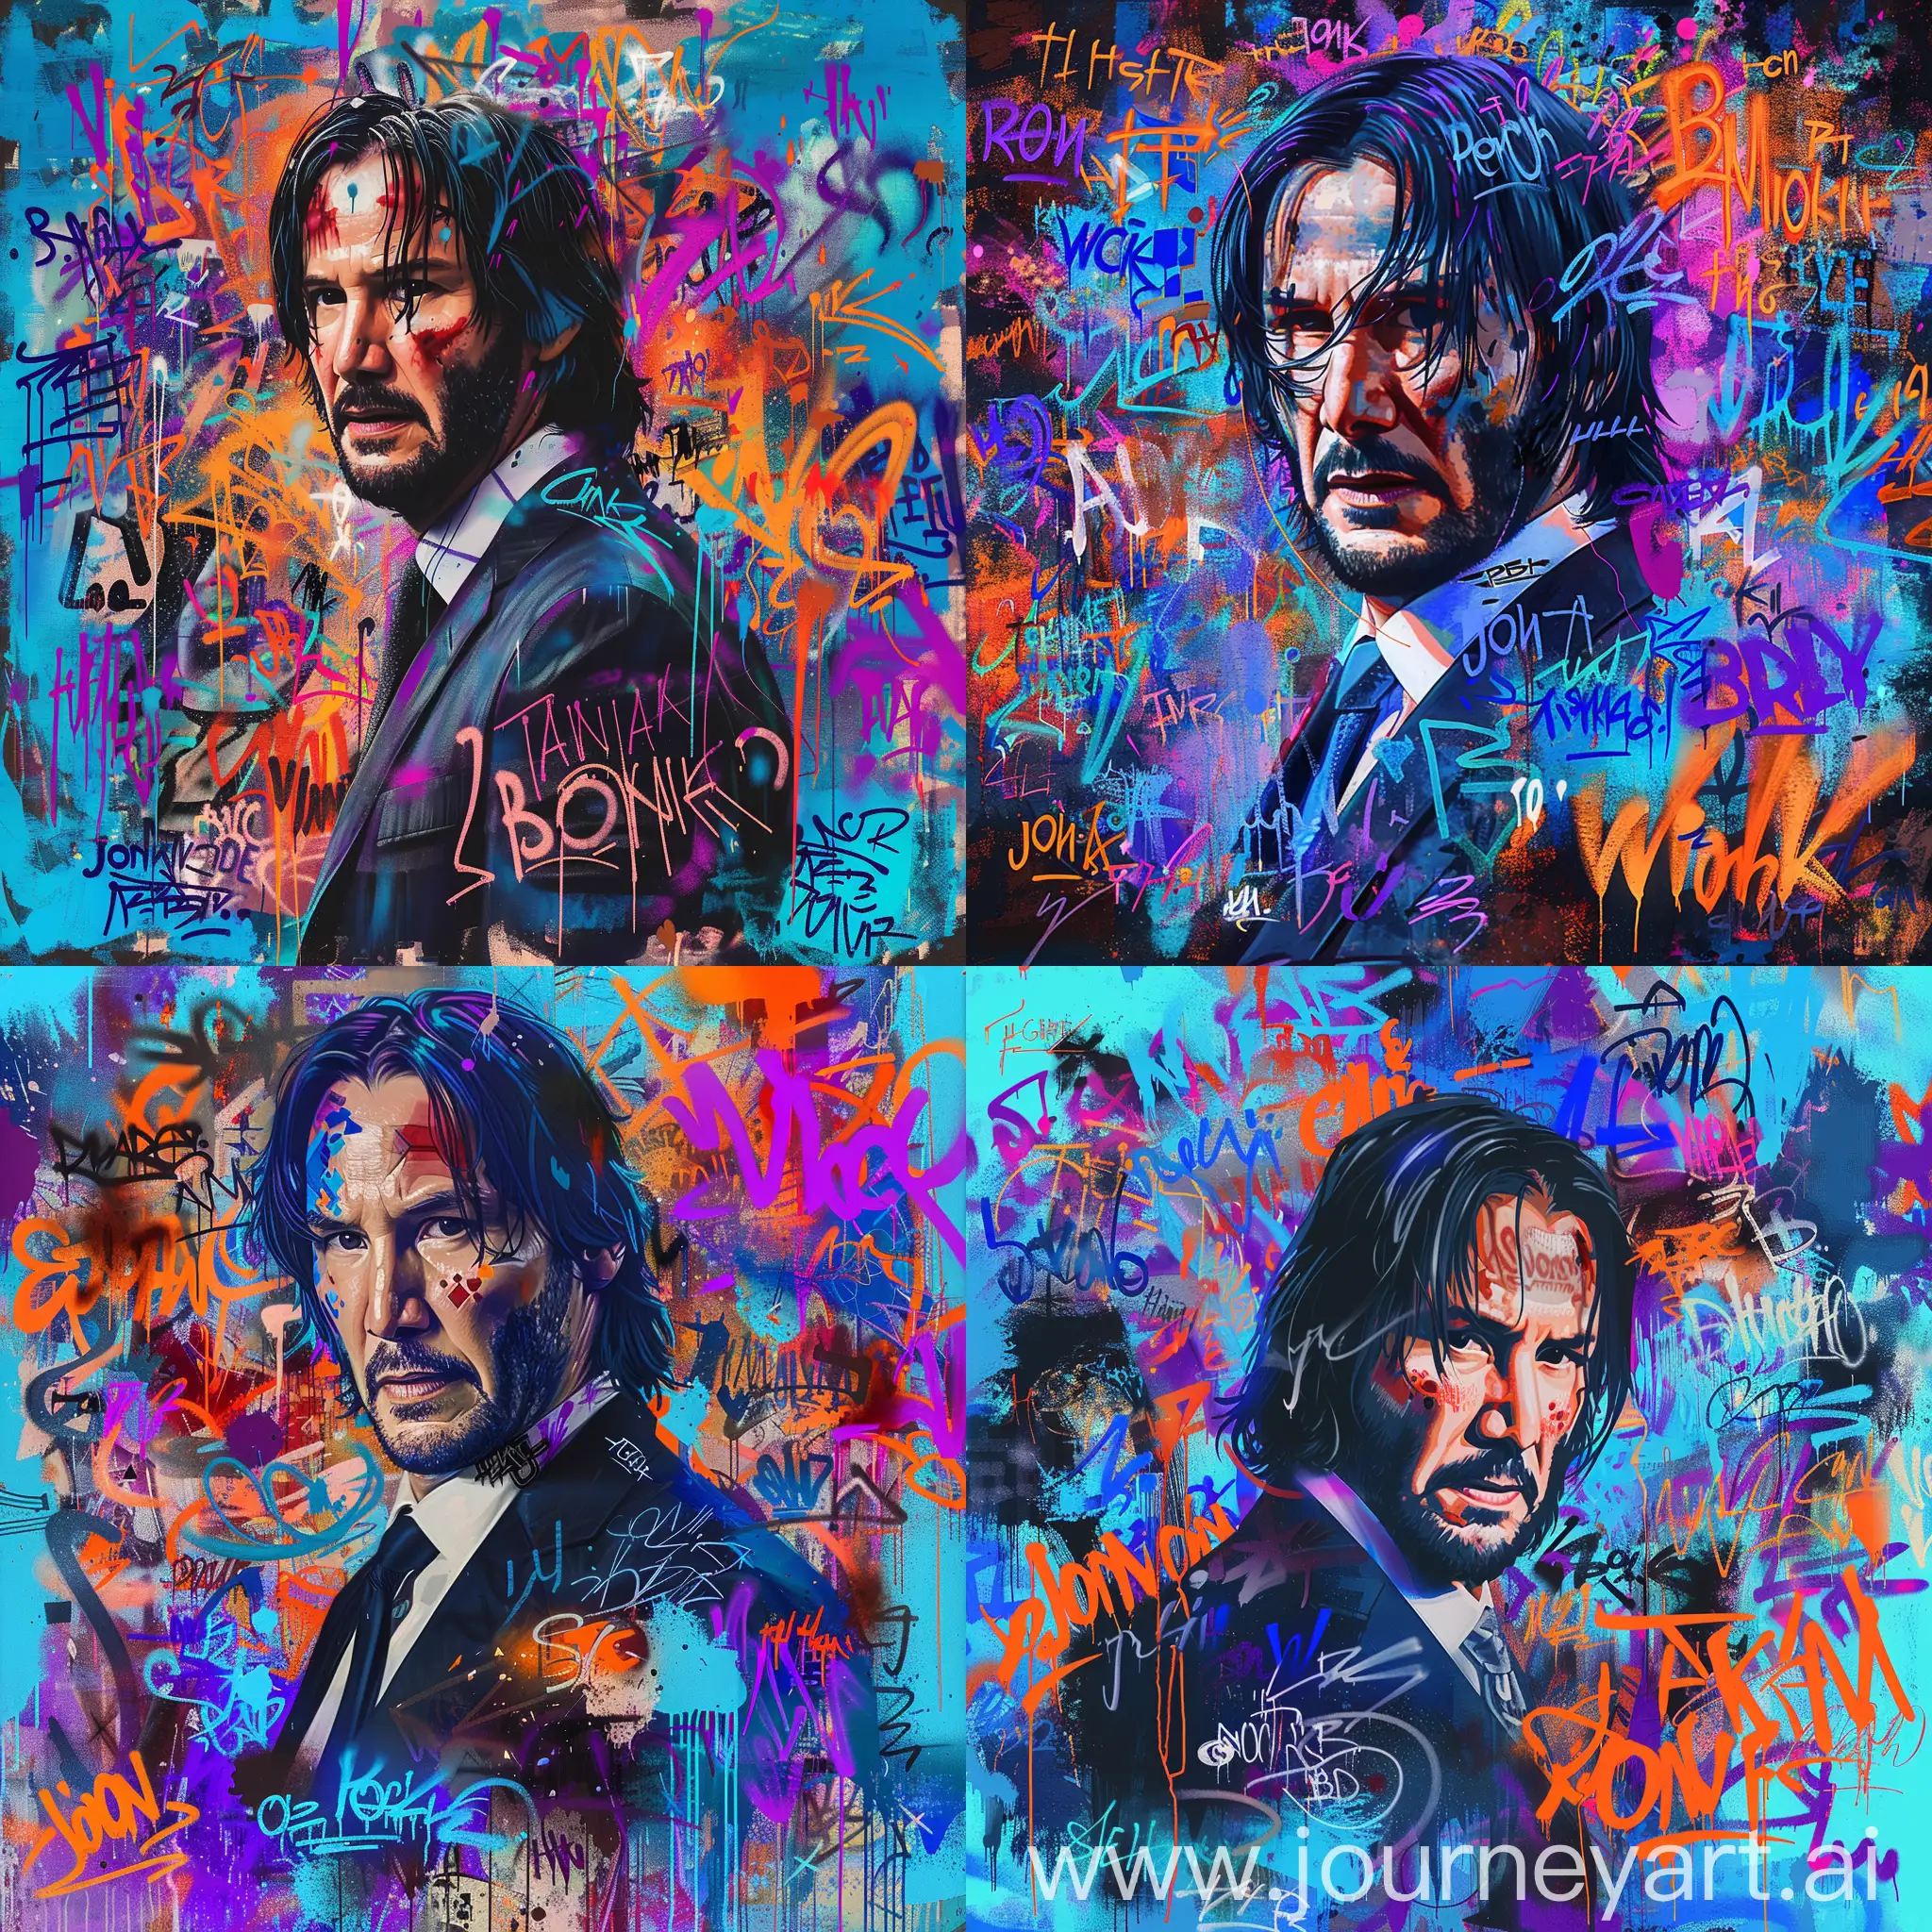 Create a stylized portrait with graffiti-like elements overlaying and surrounding john wick. The background and surrounding space should be filled with vibrant, expressive graffiti in colors such as blue, purple, orange, and red. Include various words and tags written in different styles Emulate the dynamic and energetic feel of street art while combining it with the formality of a portrait to contrast with the colorful content. --c 5